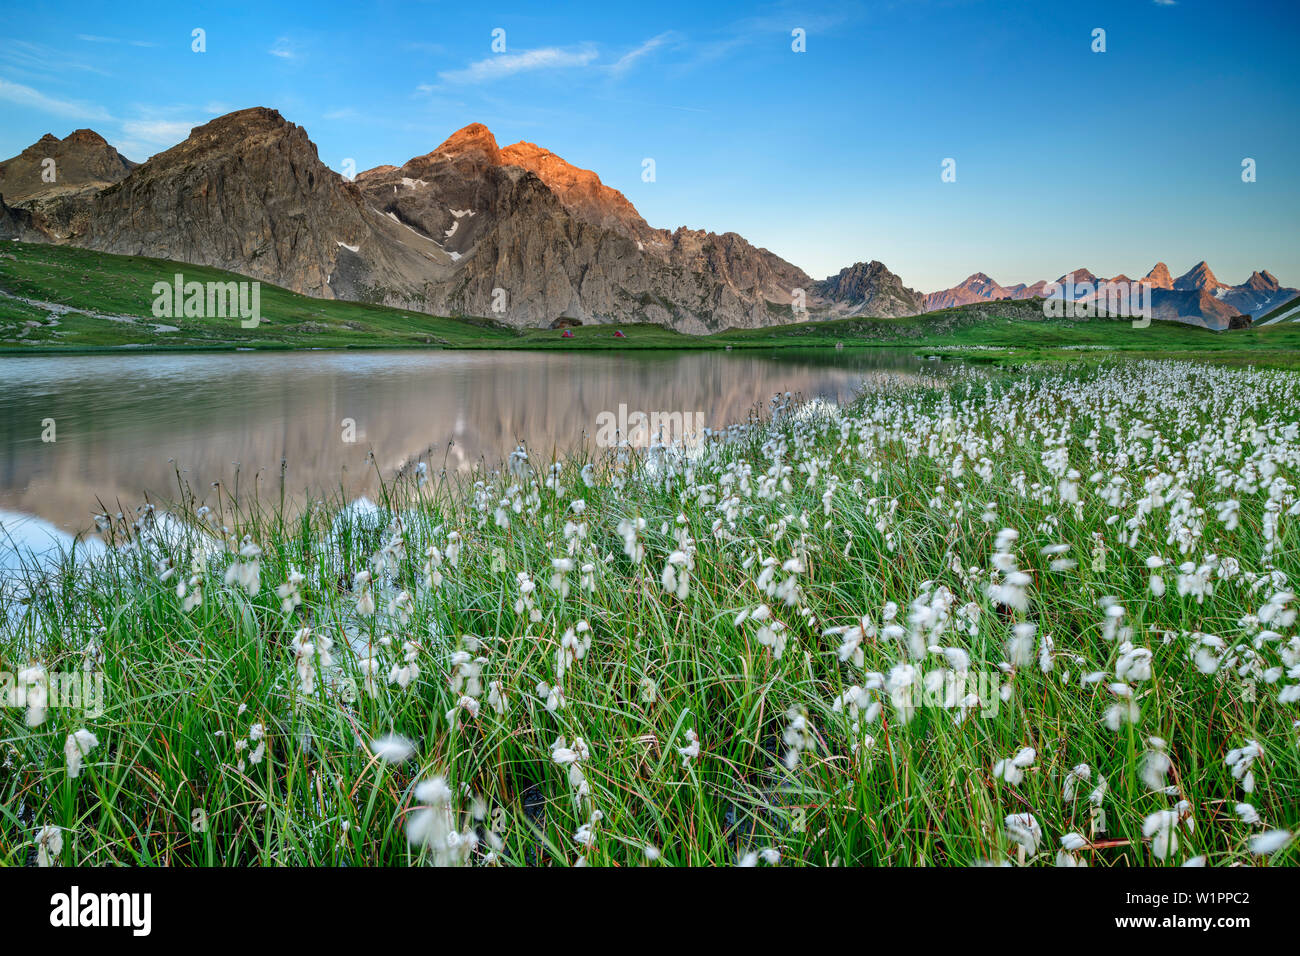 Cotton grass with lake Lac Cerces and Grand Galibier and Aiguilles d' Arves, lake Lac Cerces, Dauphine, Dauphiné, Hautes Alpes, France Stock Photo